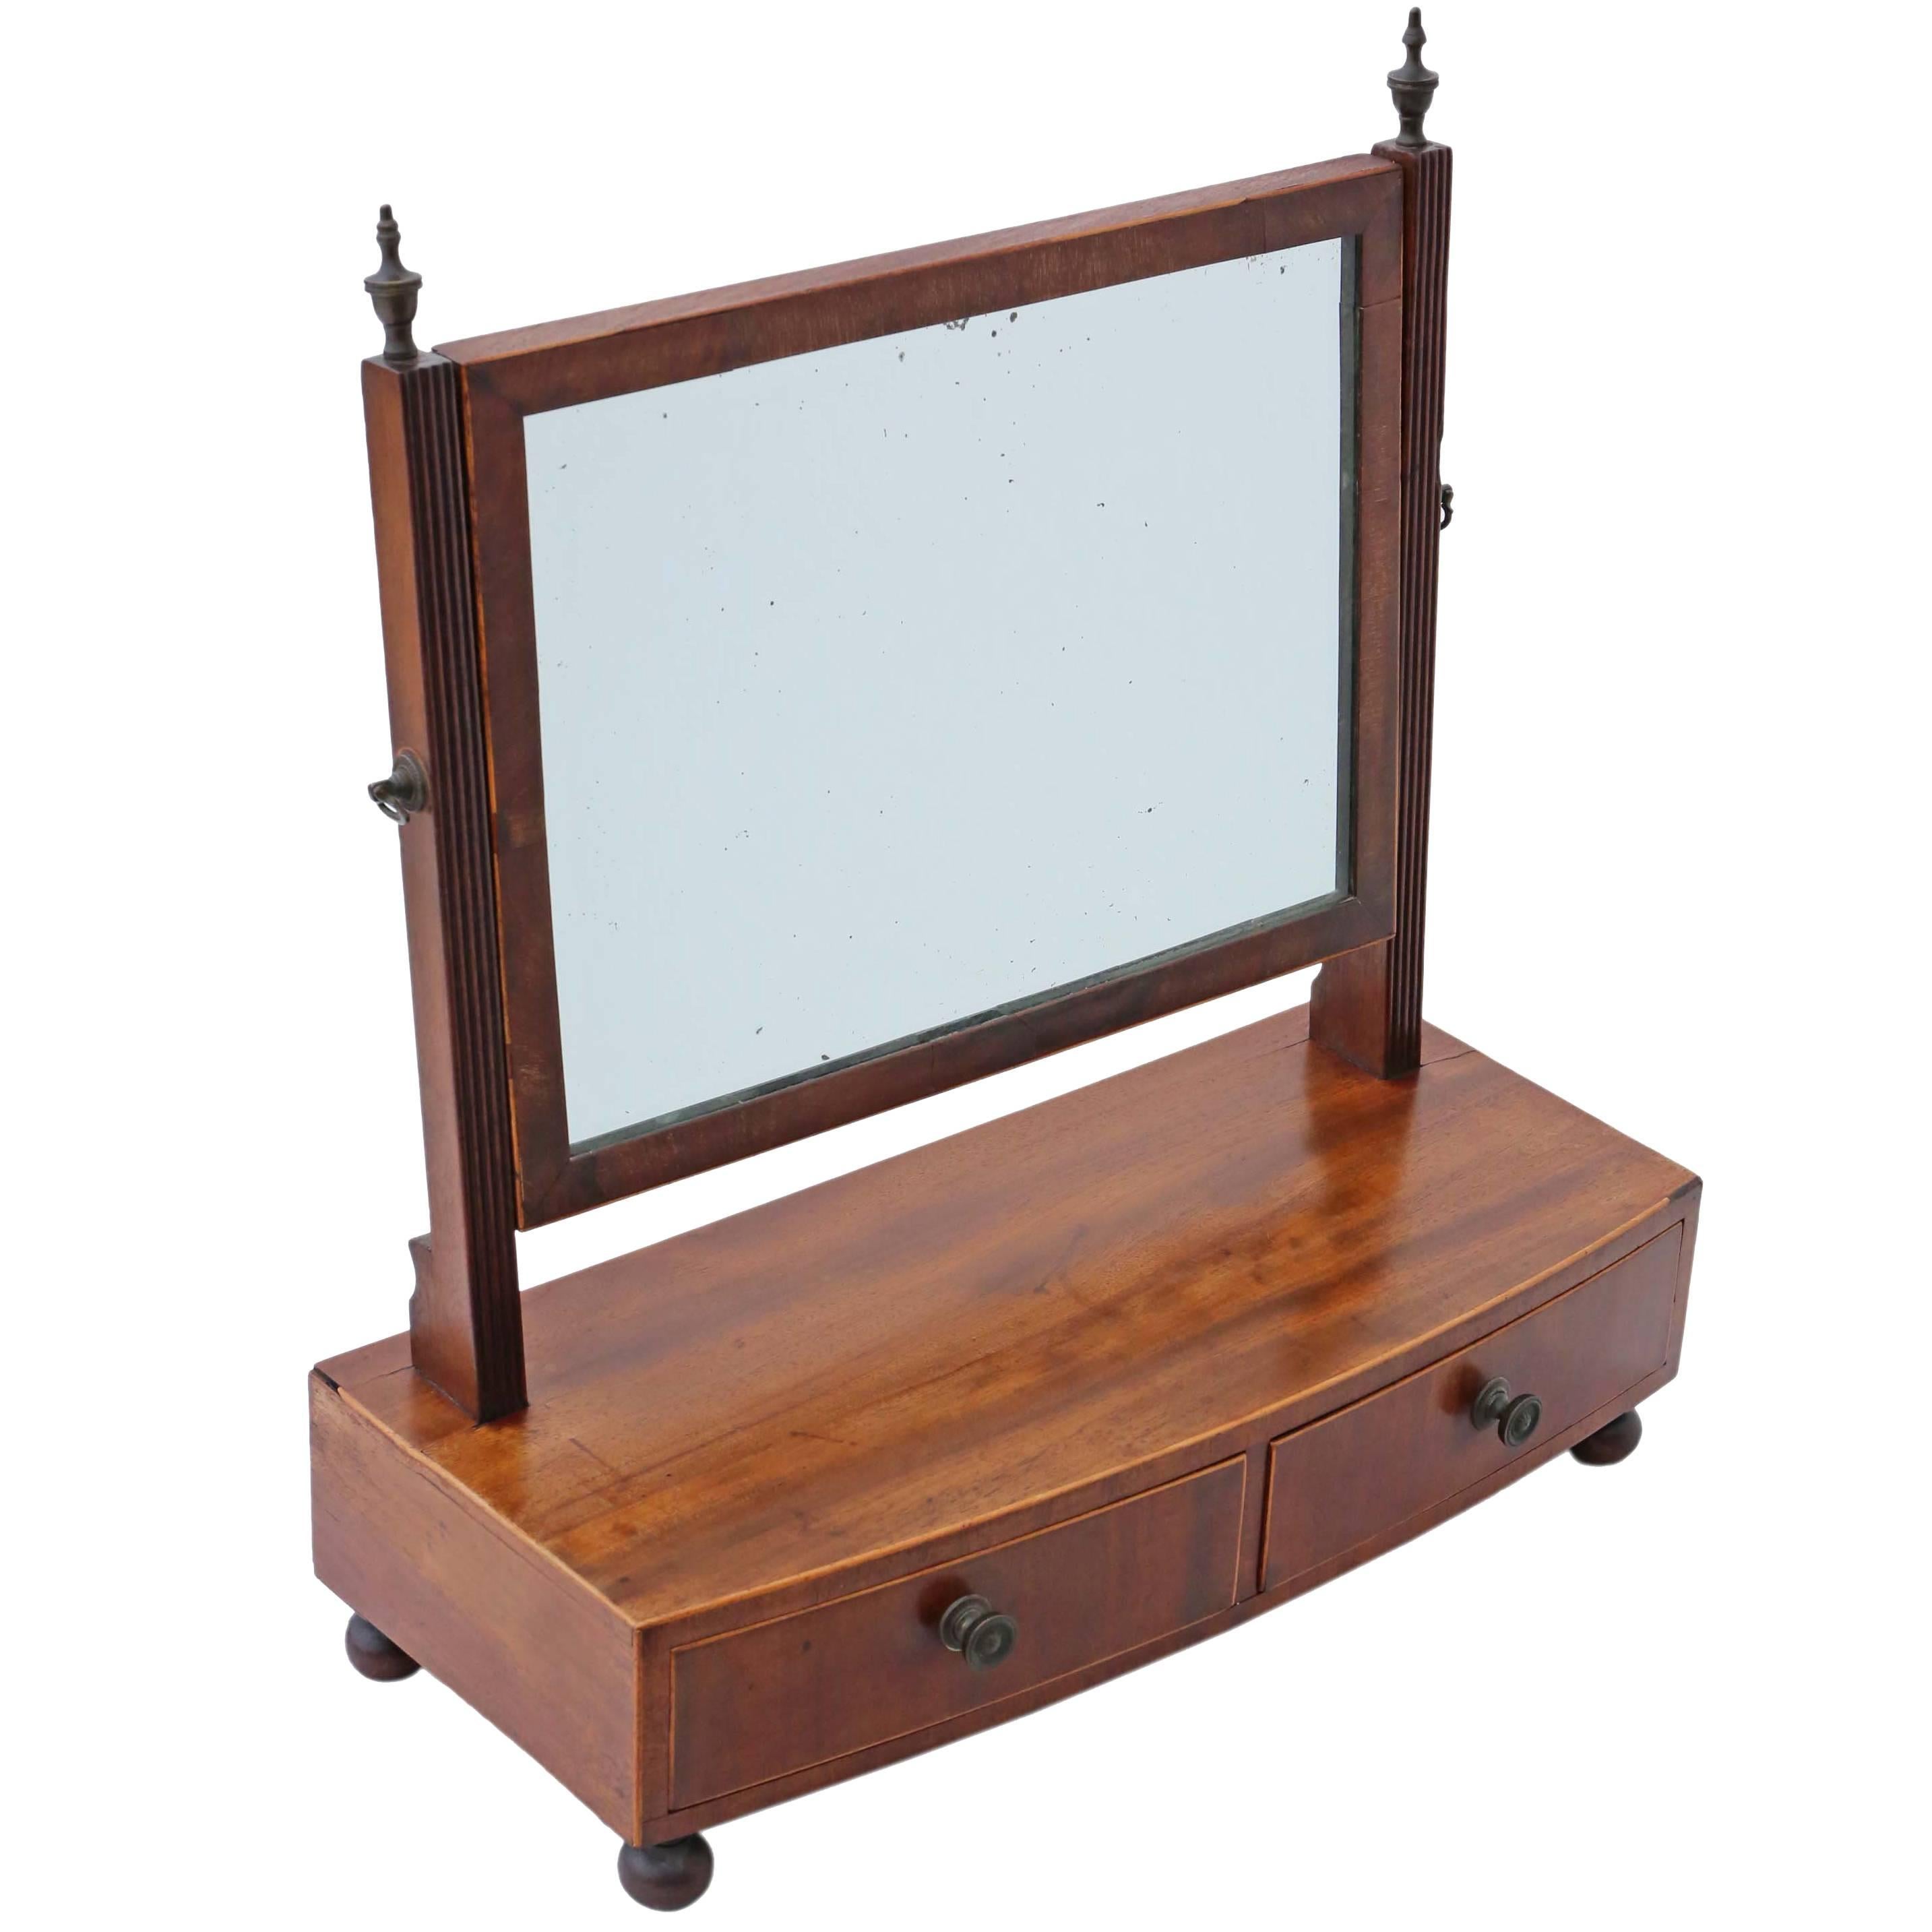 Antique Quality Regency circa 1825 Mahogany Swing Dressing Table Mirror Toilet For Sale